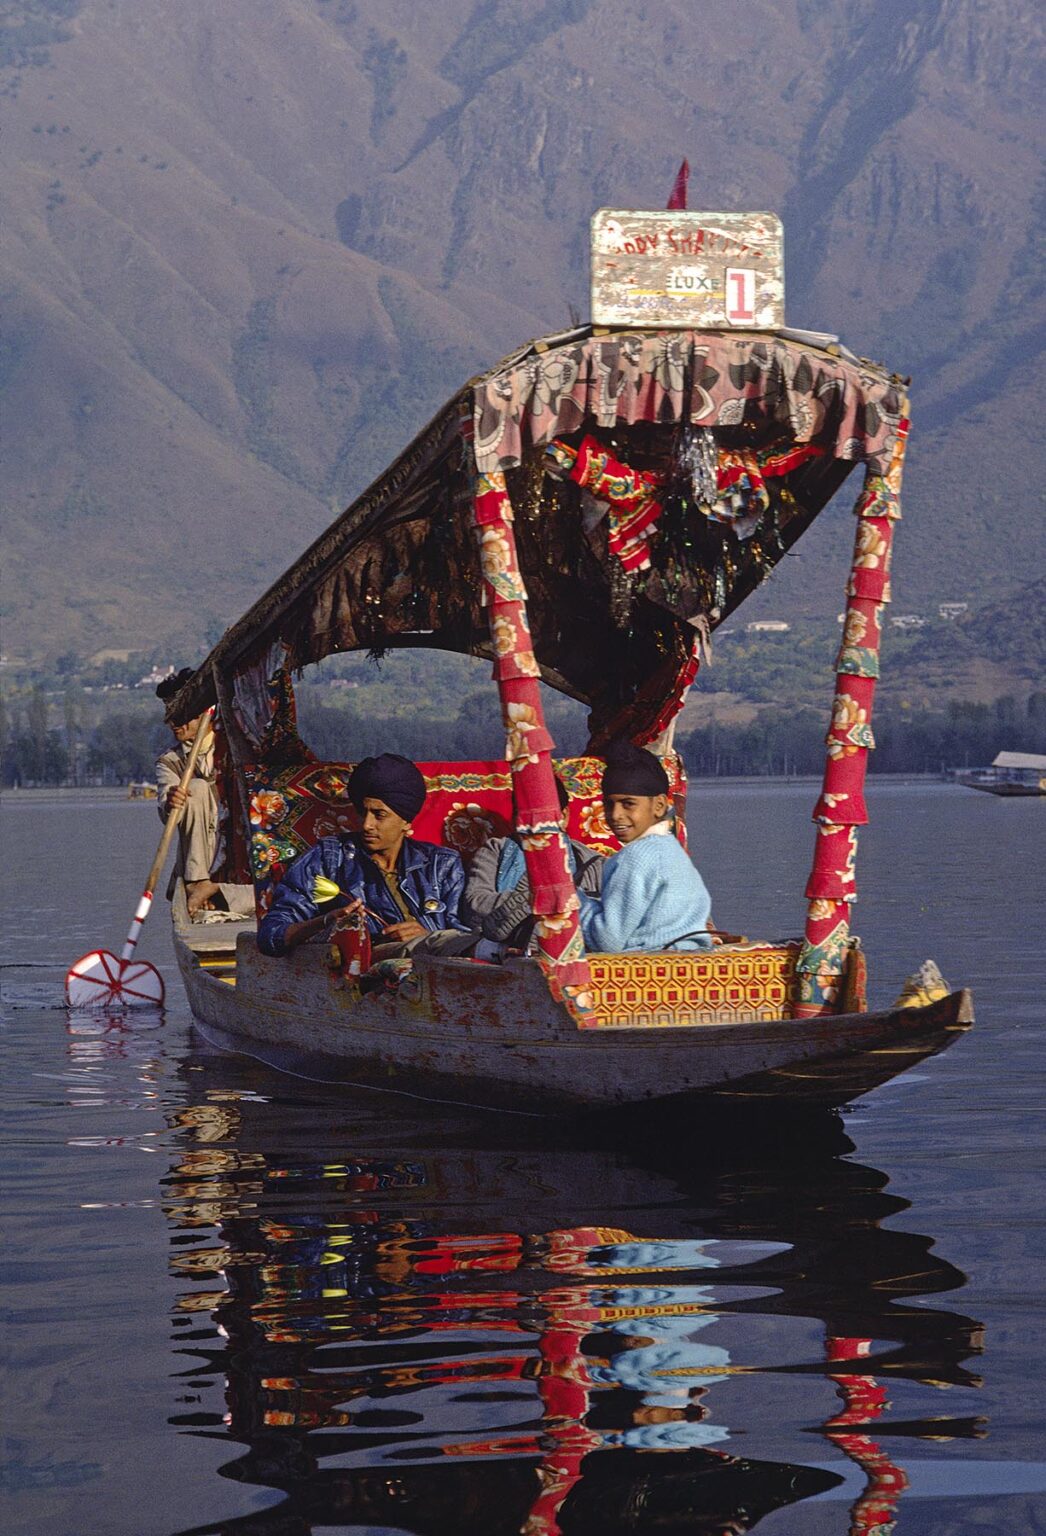 INDIAN TOURISTS take a ride in a SHIKARA, local paddle boat with a canopy, on DAL LAKE in SRINIGAR - KASHMIR, INDI